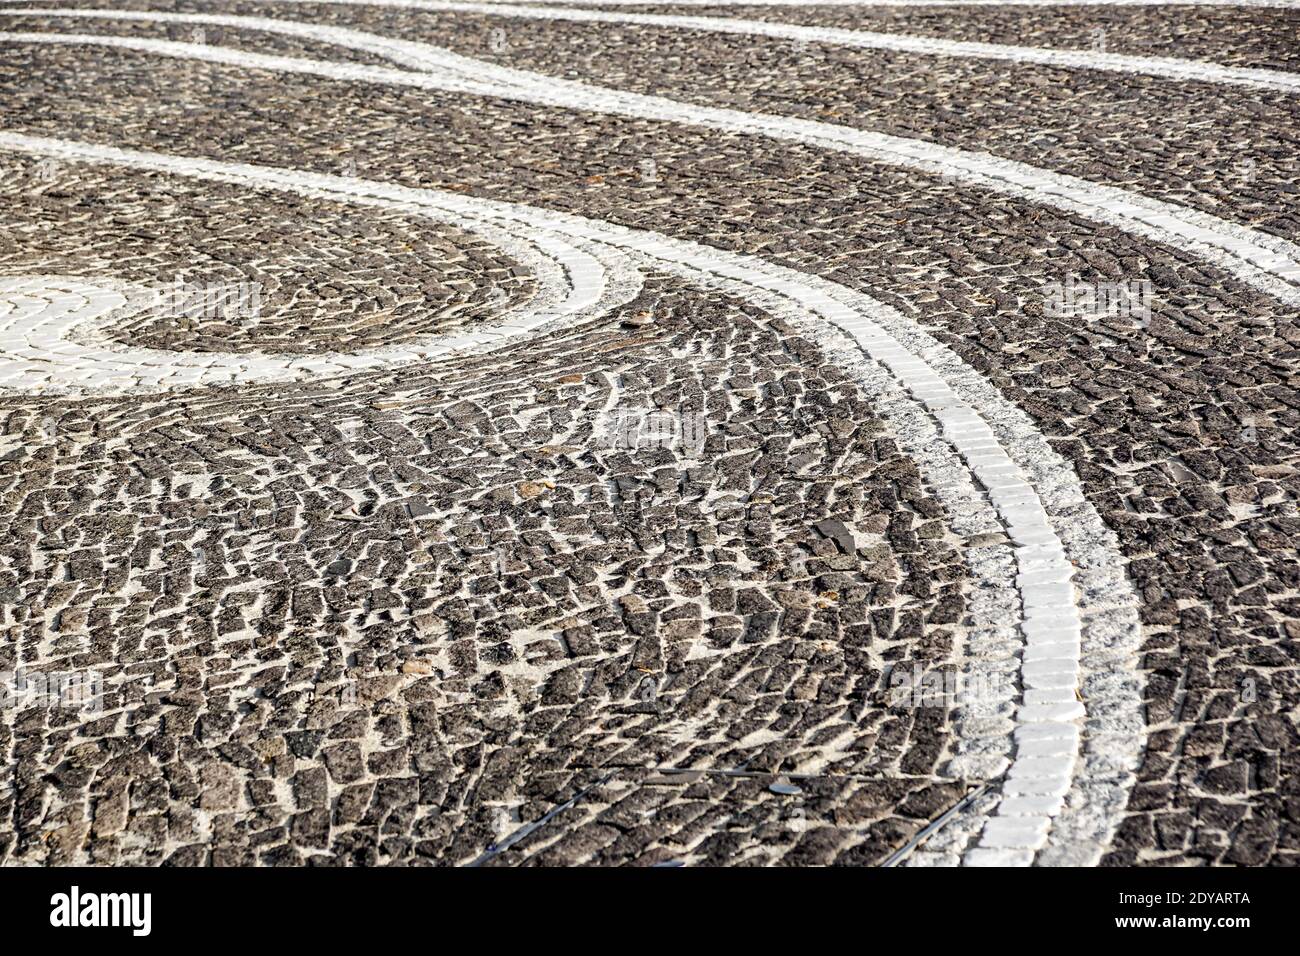 Background image of old cobblestone road backlit with low sunlight. Stone texture close up. Small pebbles on the road. Stone path Stock Photo